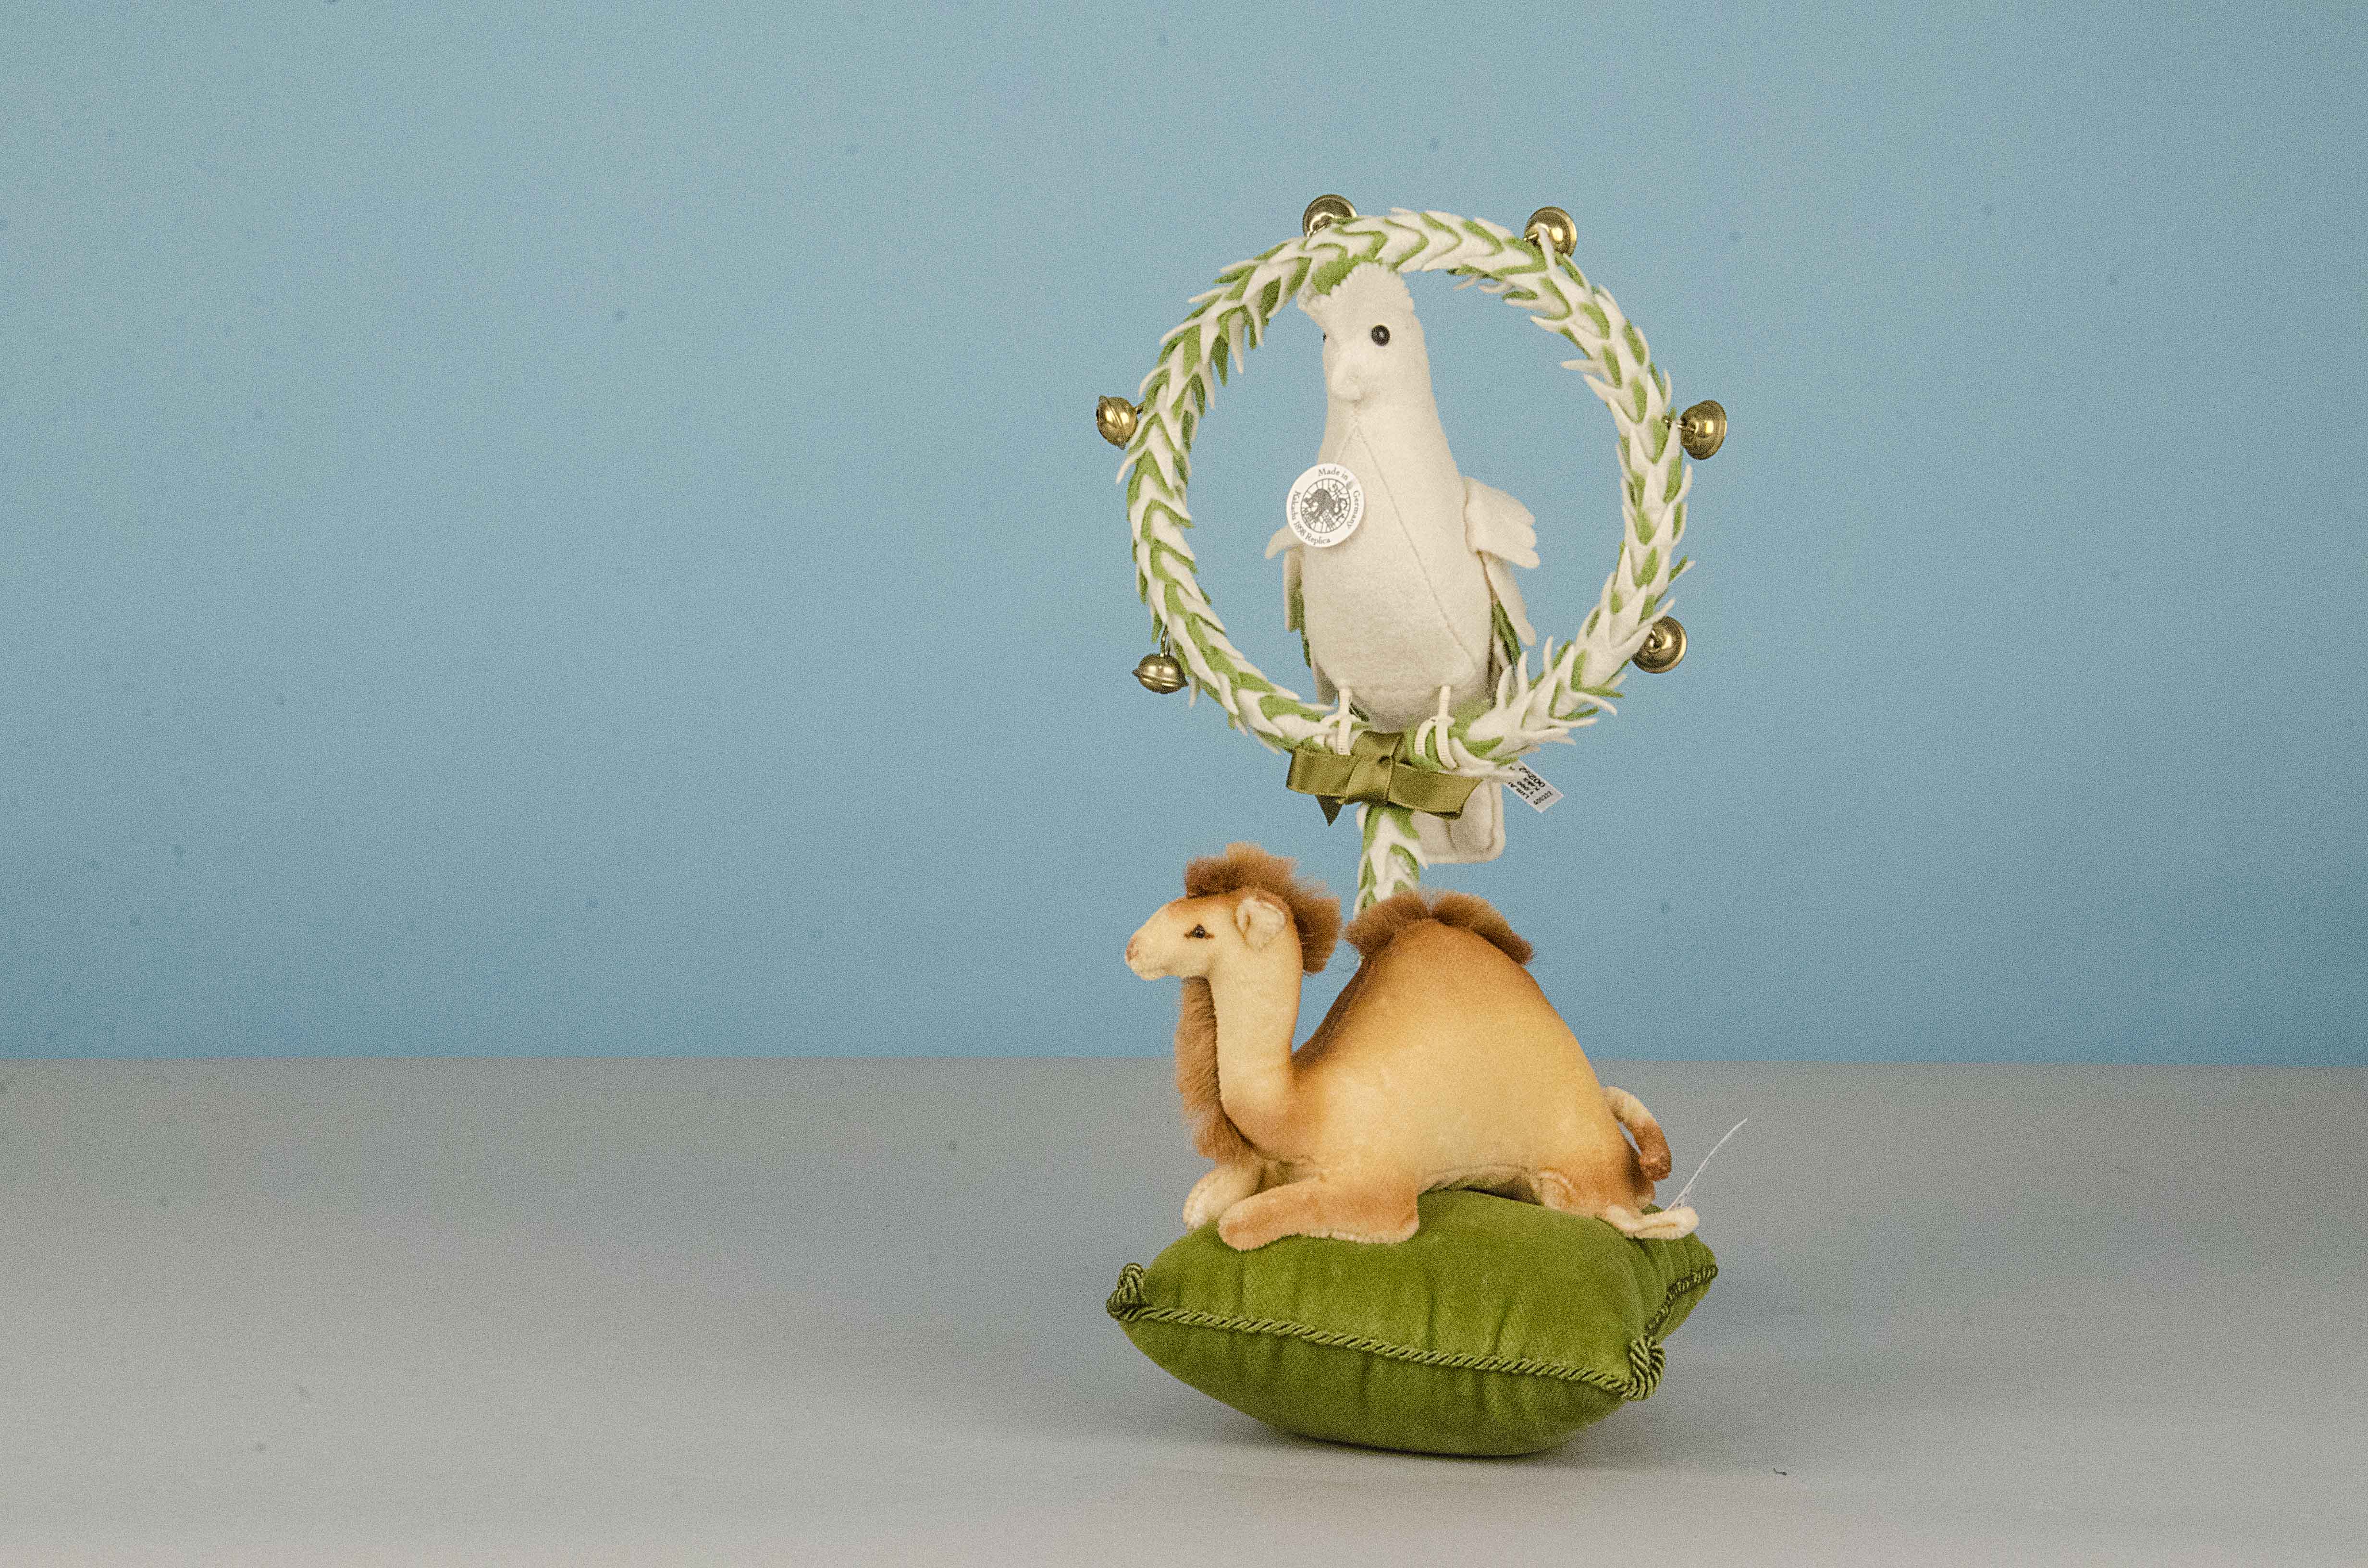 Steiff Limited Edition replica early toys: Cockatoo Rattle 1898, 292 of 1000, 2008; and Camel on